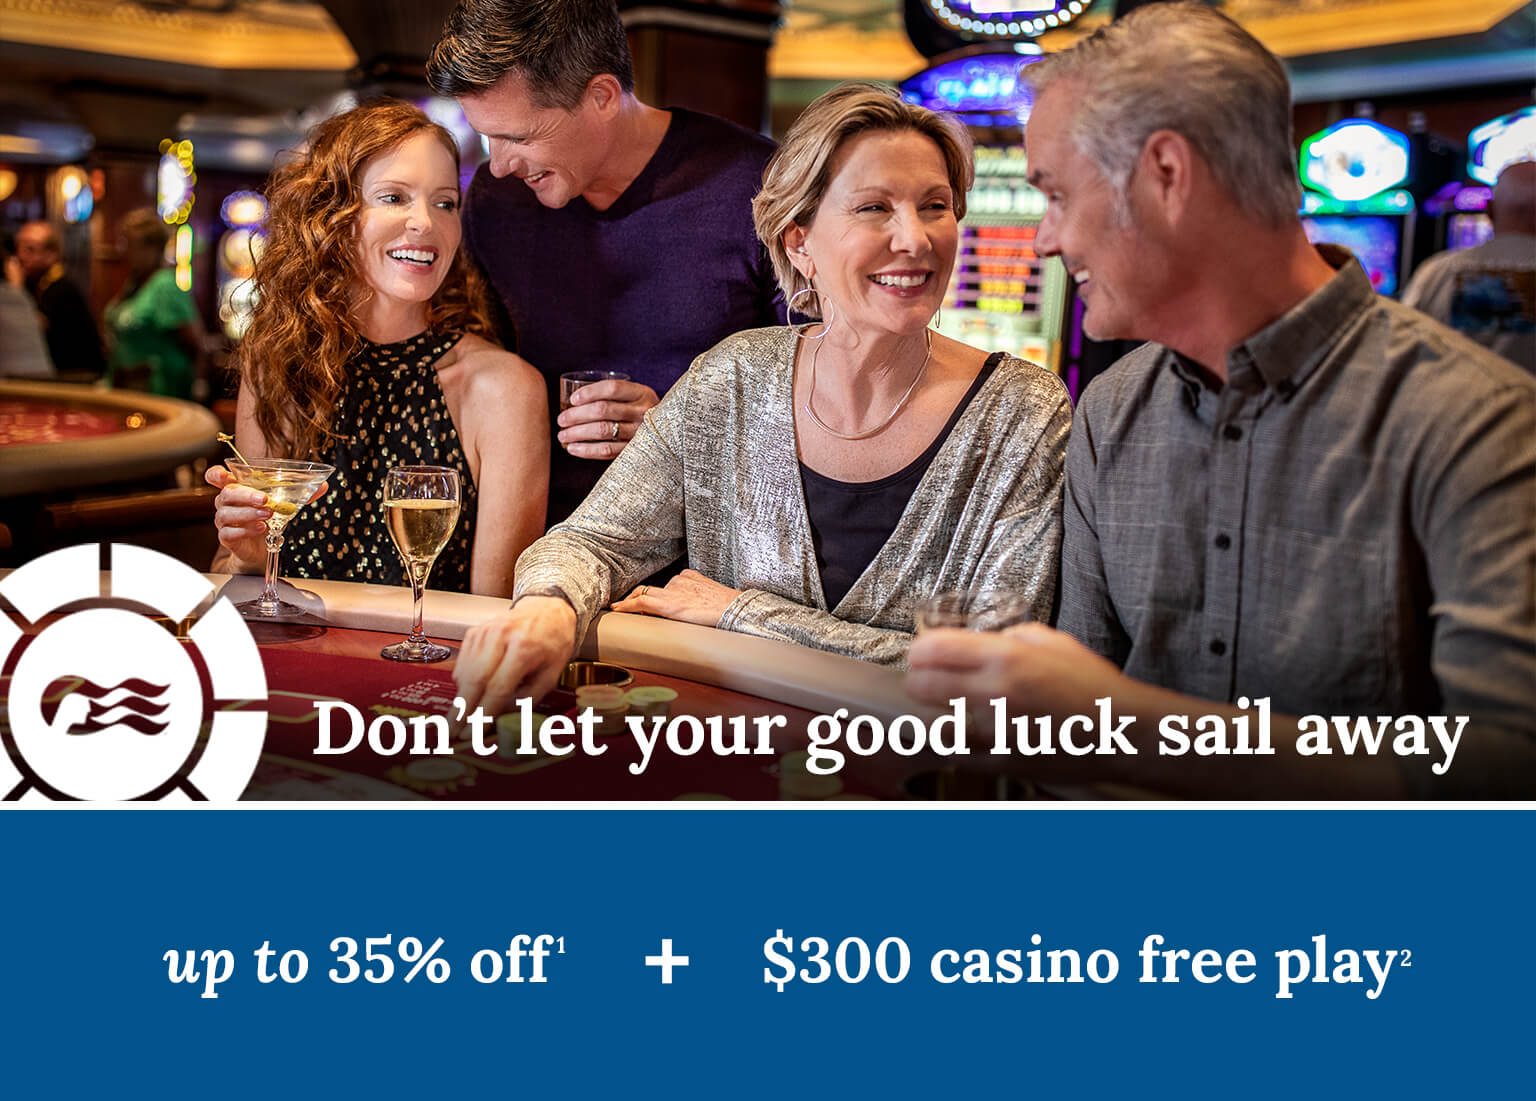 Up to 35% off + $300 casino free play. Click here to book.